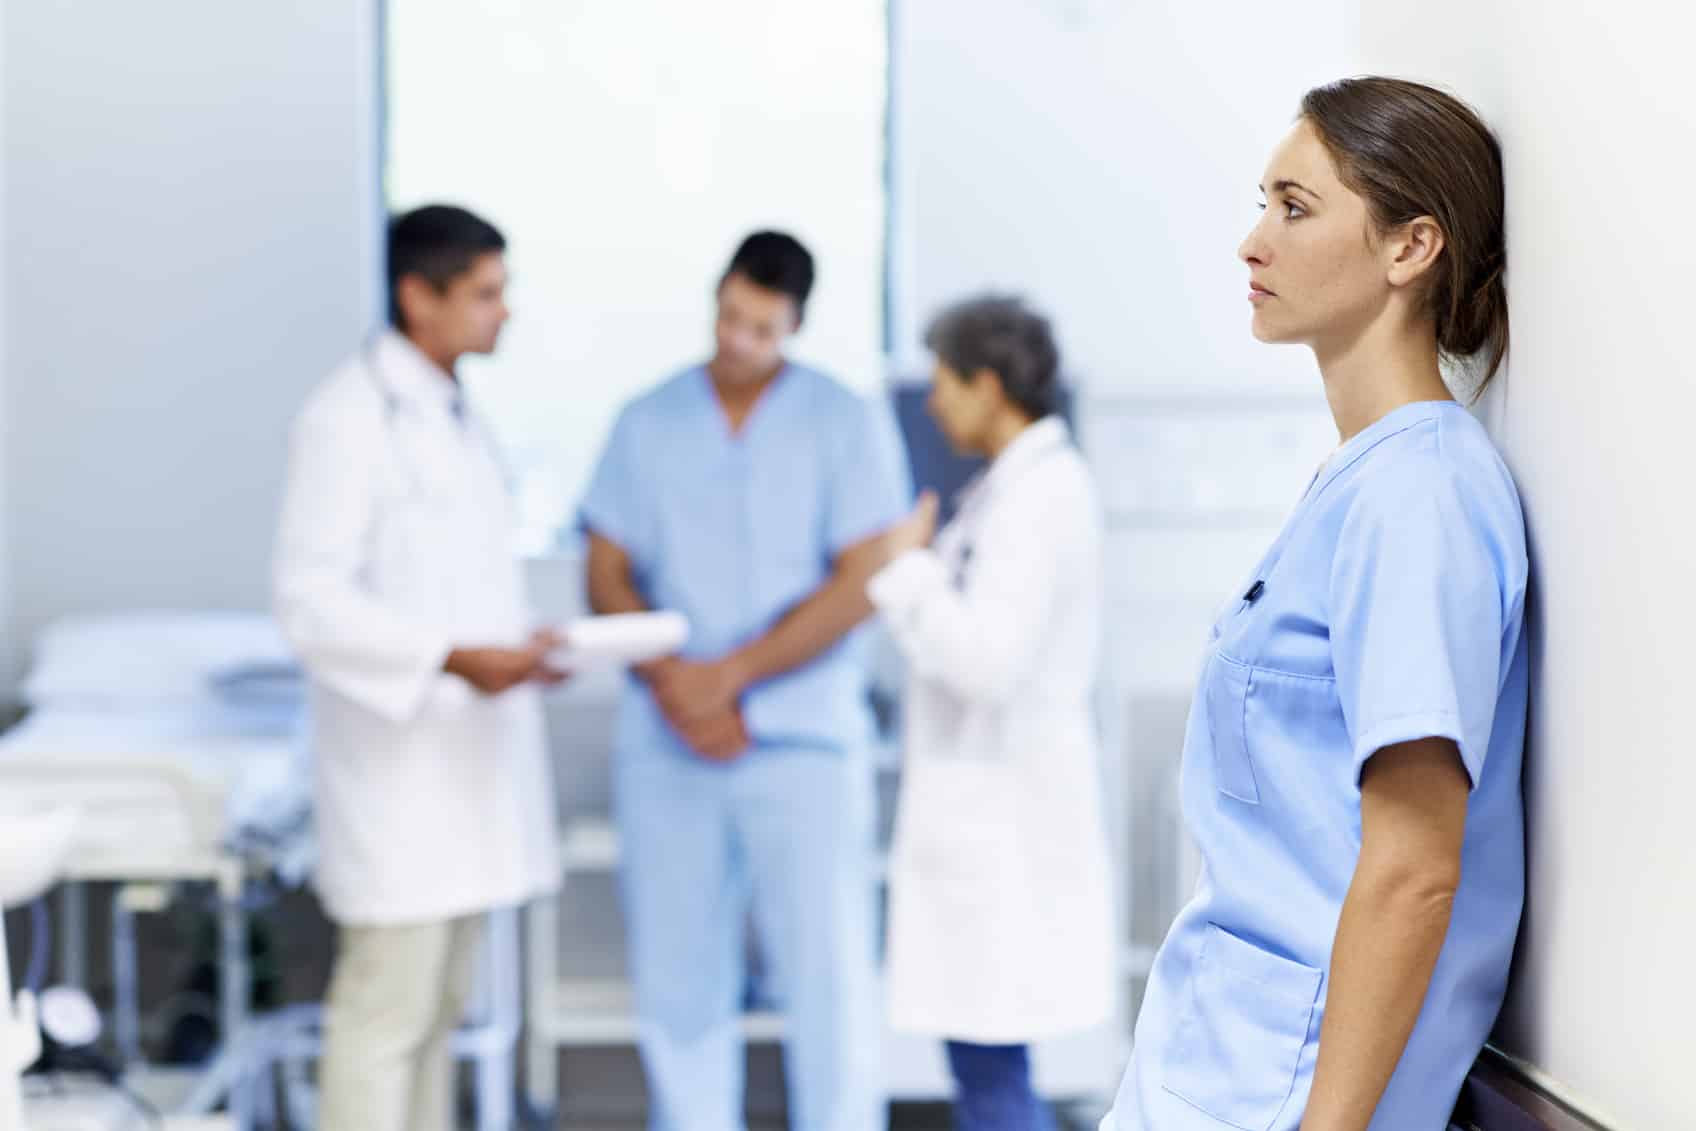 Shot of a tired looking nurse leaning against a wall with colleagues in the background